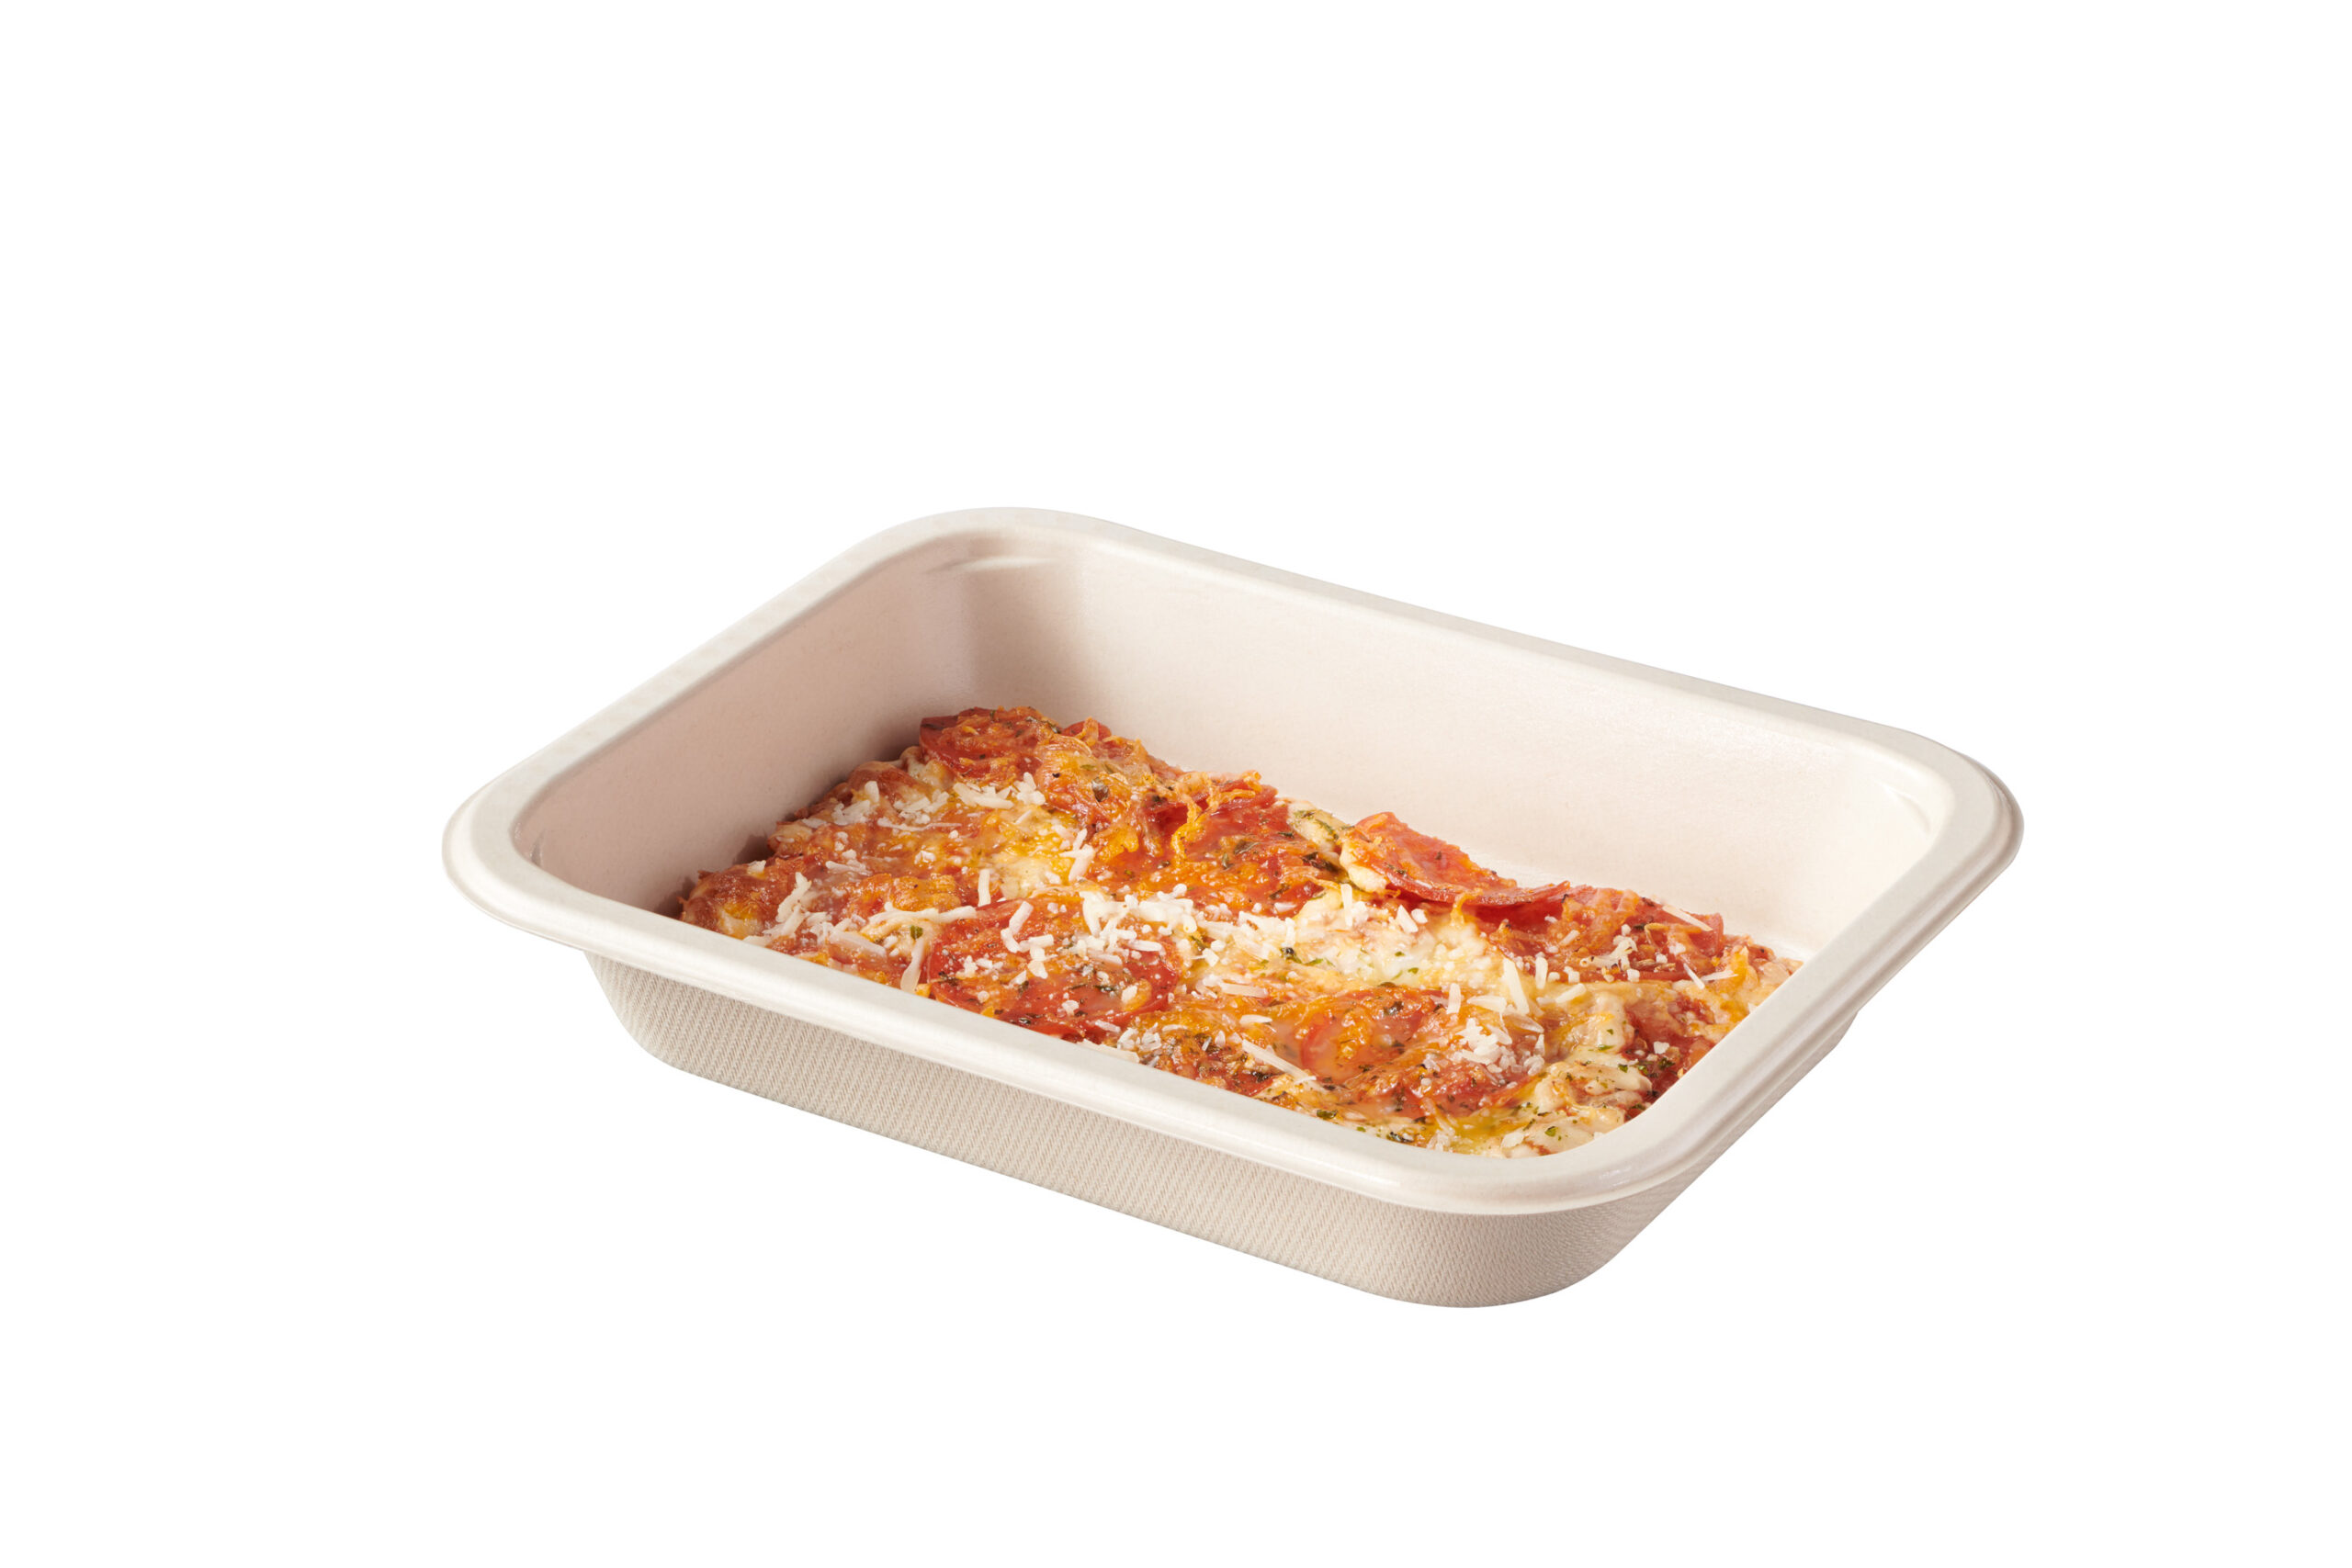 Compostable Food Tray with Pizza, uncovered